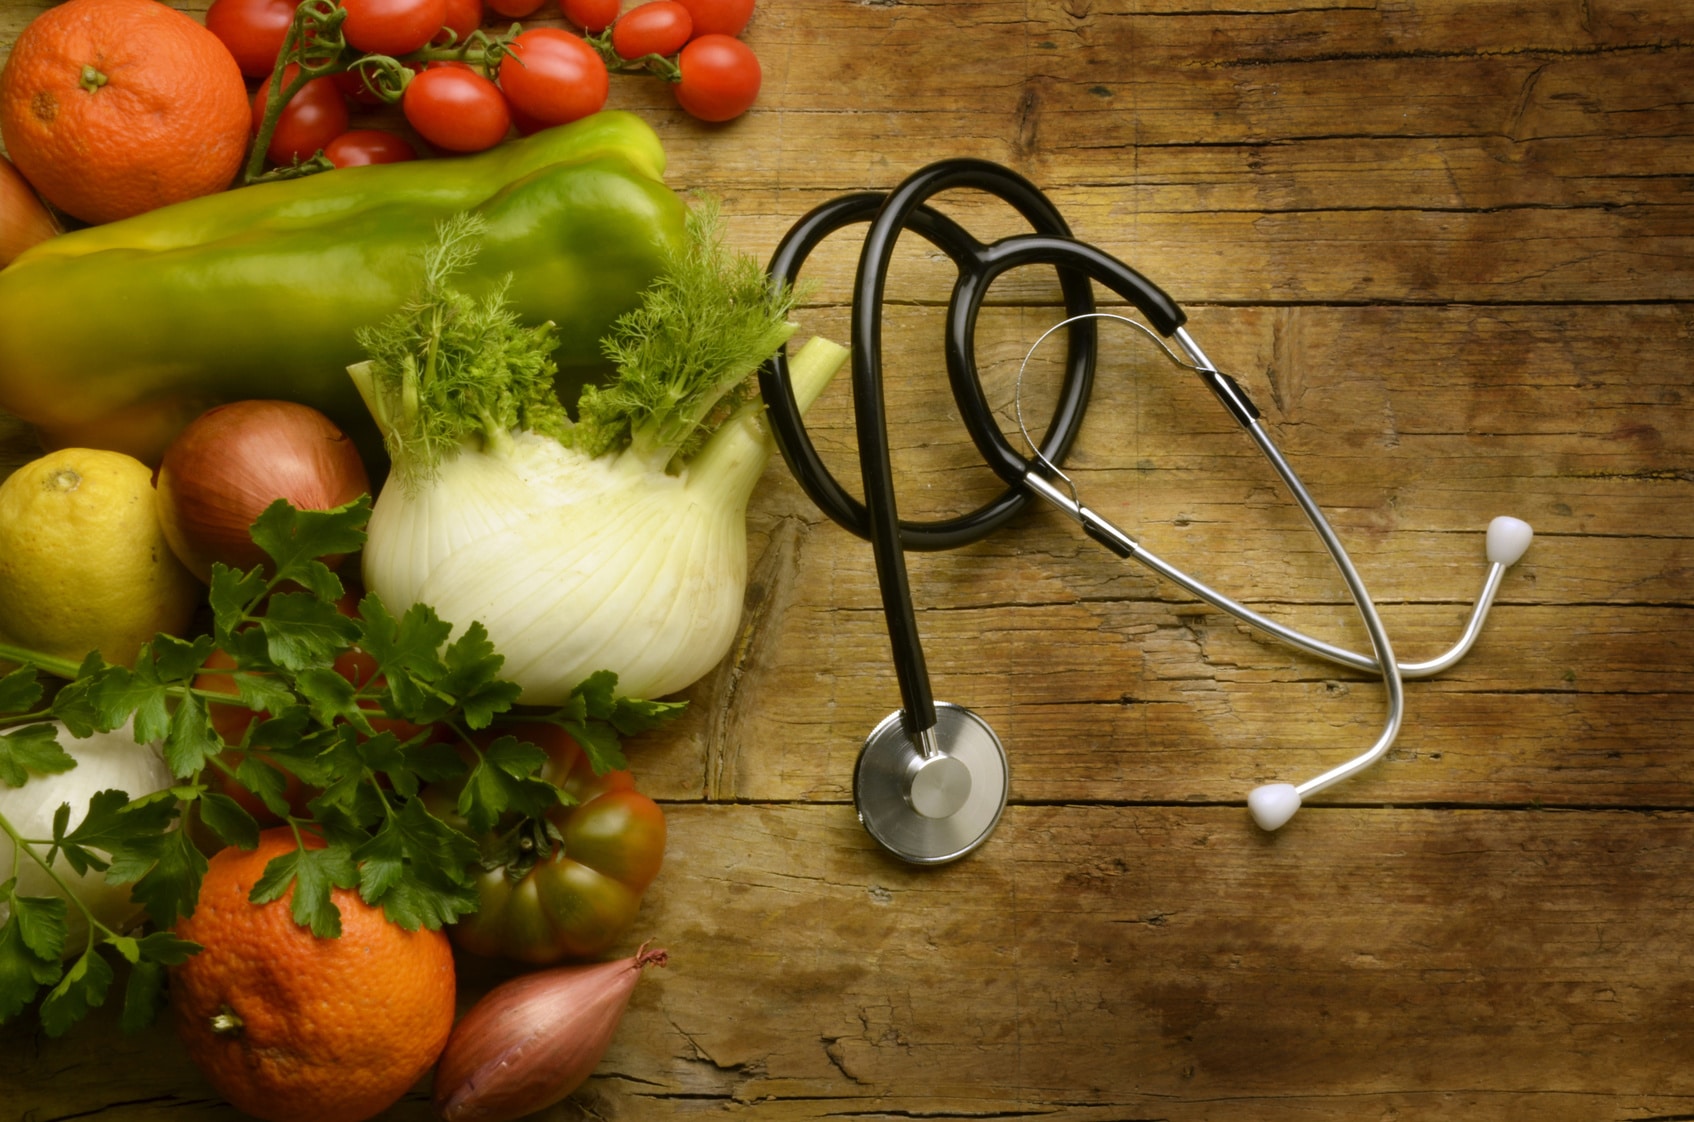 Stethoscope next to fruits and vegetables.